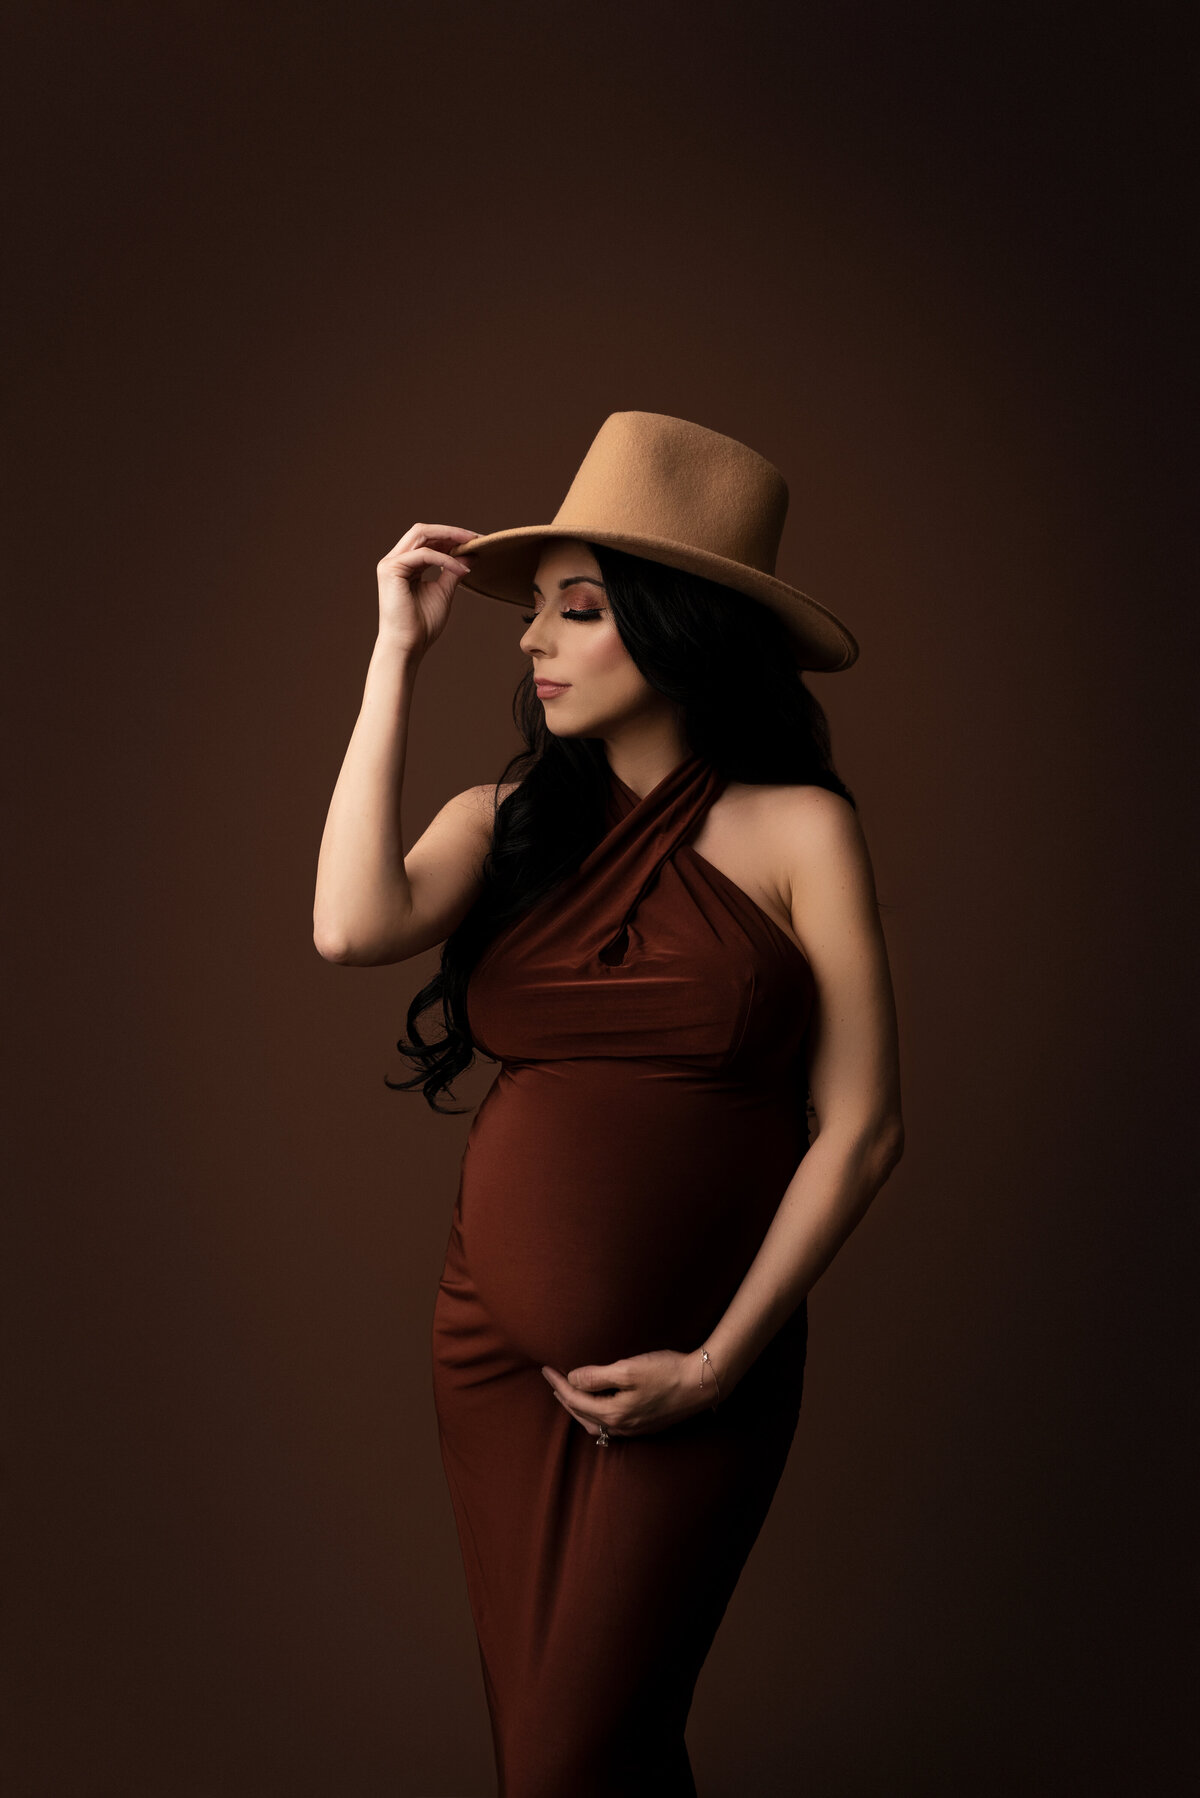 Captured by Katie Marshall, renowned as the best Philadelphia Main Line maternity photographer, this stunning black and white maternity photo features a woman standing against a rich brown backdrop. She is elegantly attired in a burgundy-brown halter maternity gown and a stylish tan wide-brim hat, creating a captivating contrast. Slightly angled away from the camera, one hand cradles her baby bump, while the other touches the brim of her hat. Her head is turned away from the camera, showcasing her graceful side profile, resulting in a powerful and emotive maternity portrait.